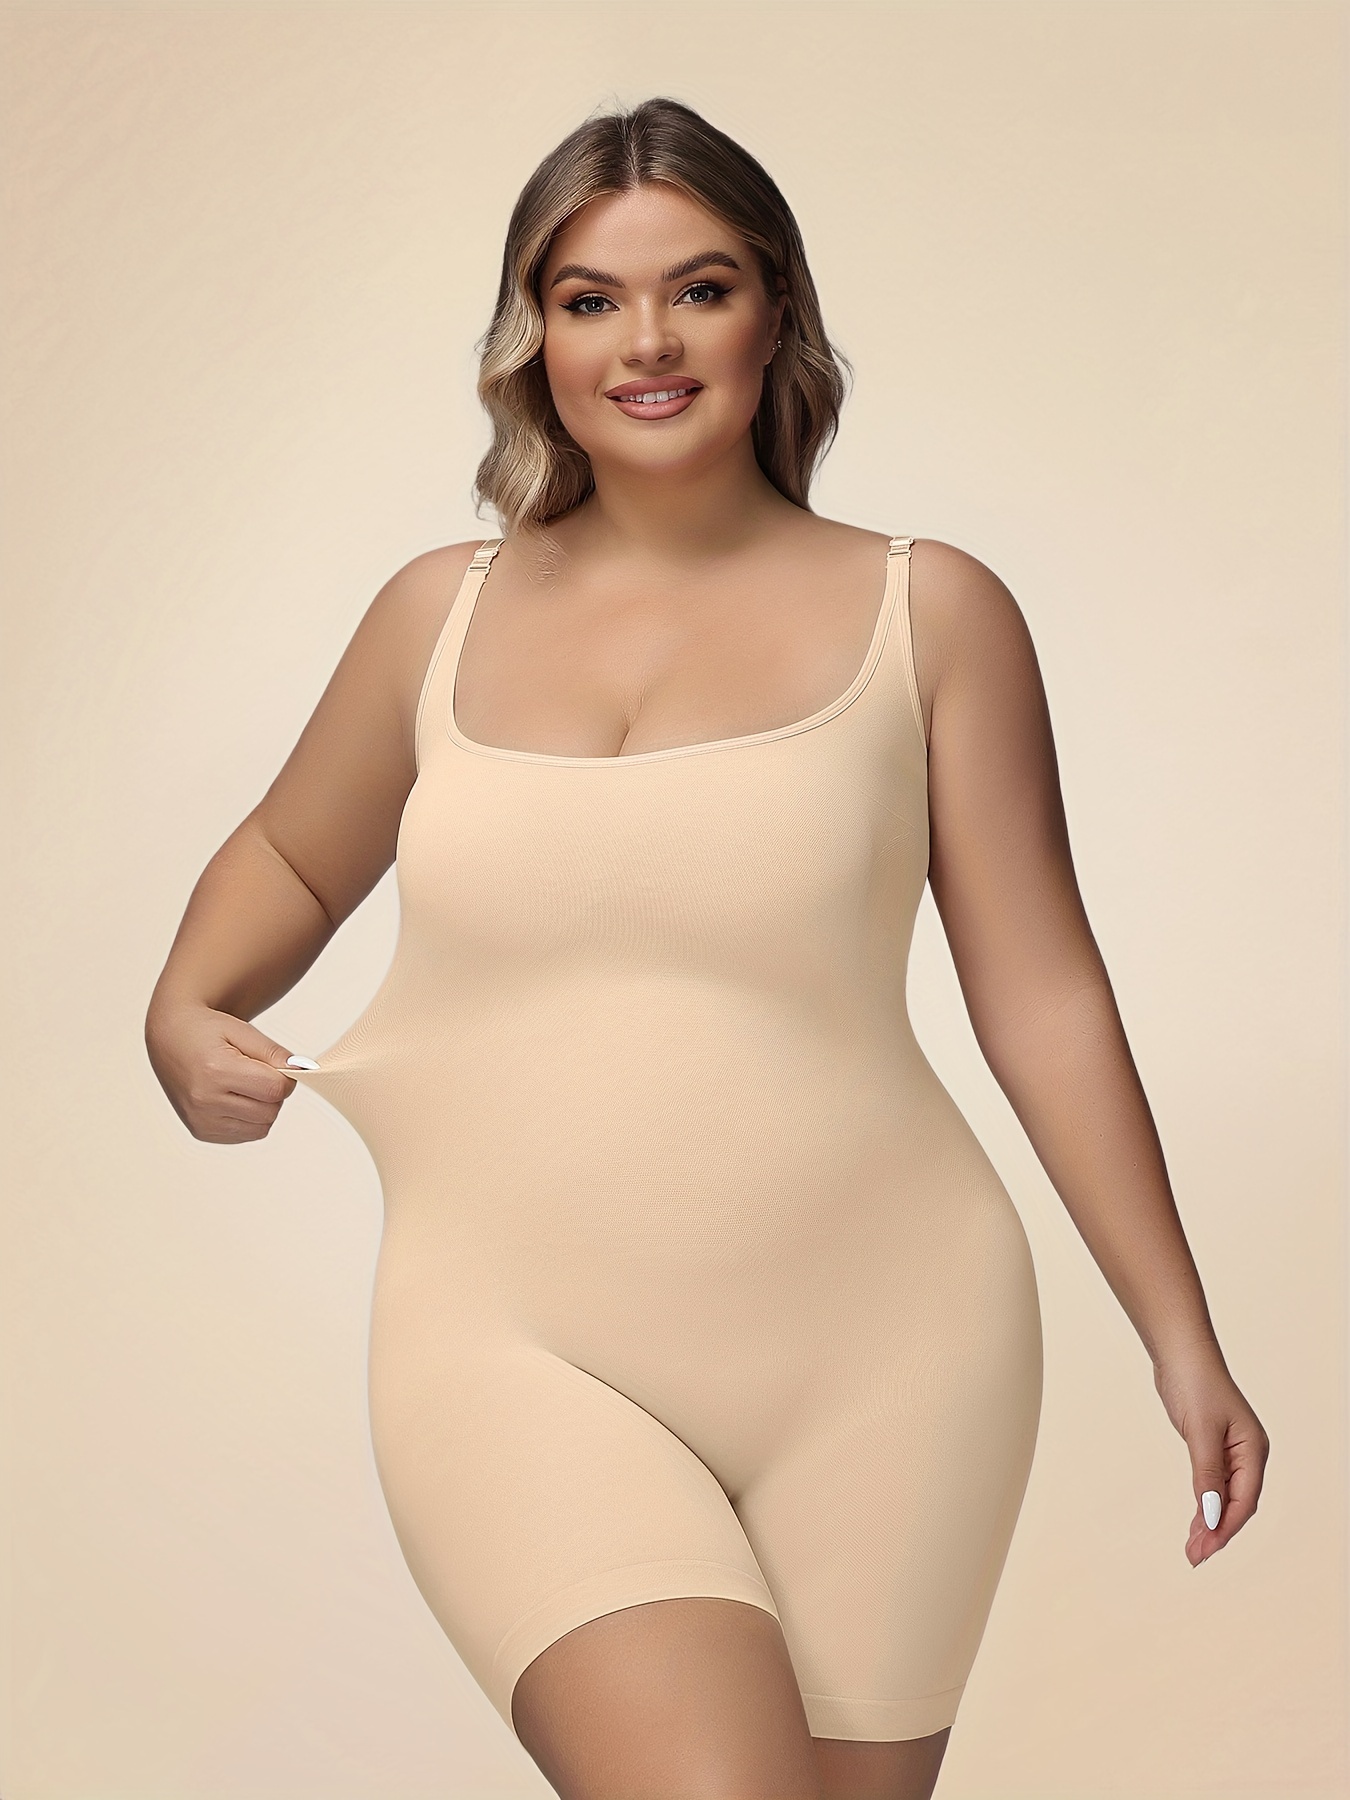 Simply Seamless Jumpsuit - Women's